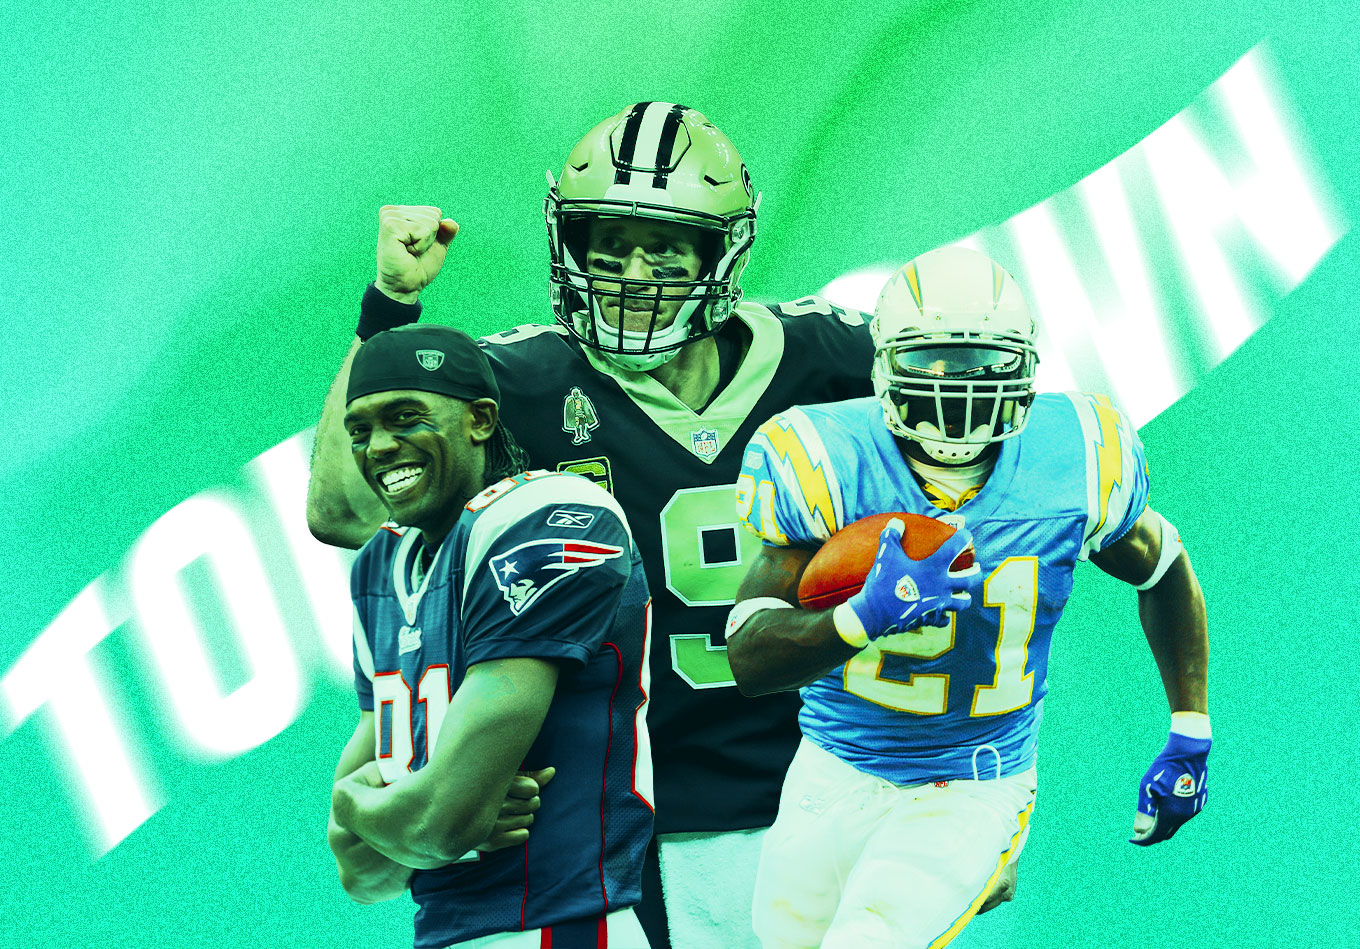 Finding Paydirt: The Most Touchdowns in NFL History